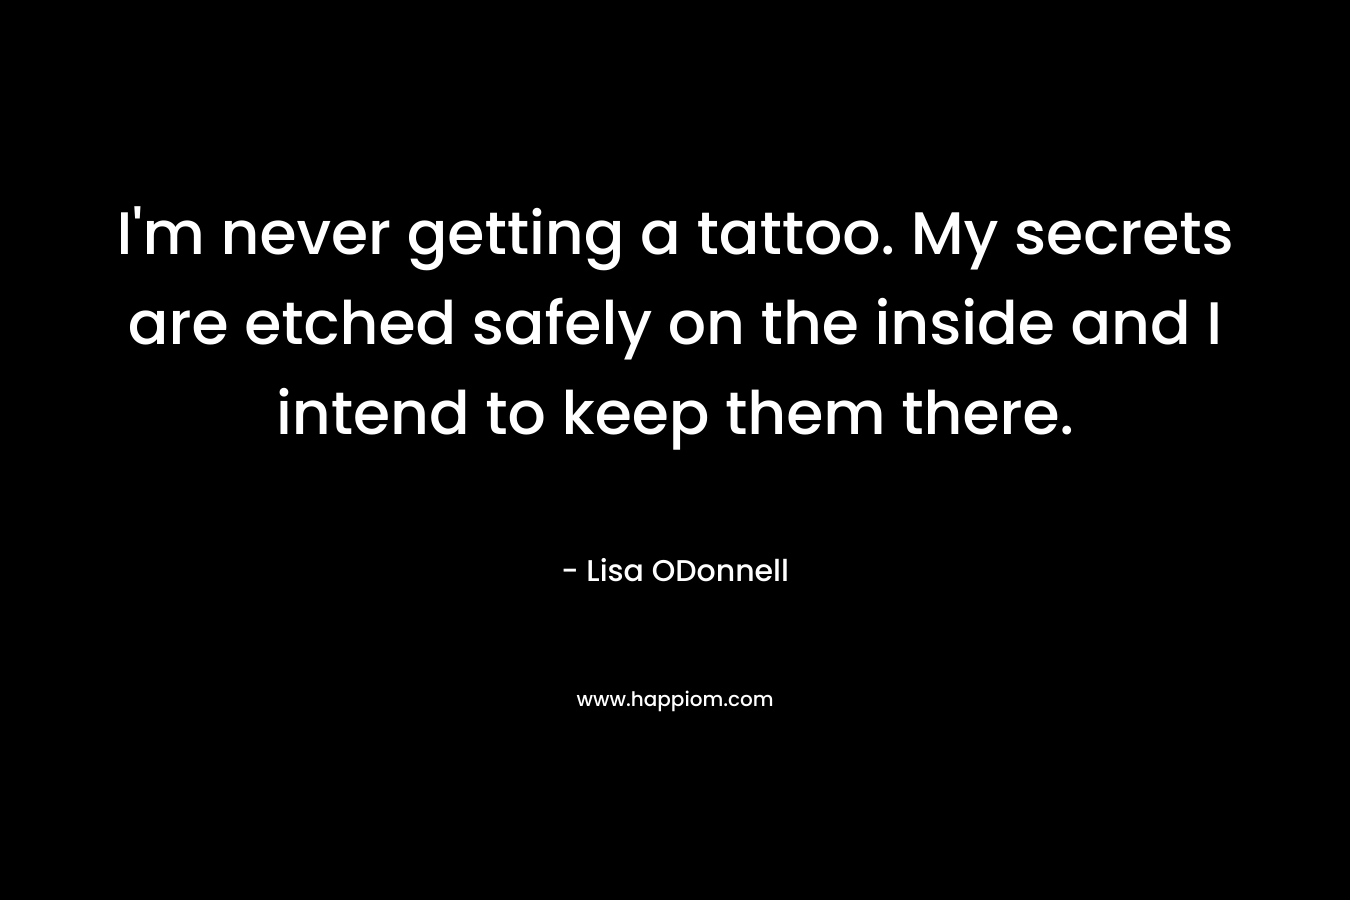 I’m never getting a tattoo. My secrets are etched safely on the inside and I intend to keep them there. – Lisa ODonnell